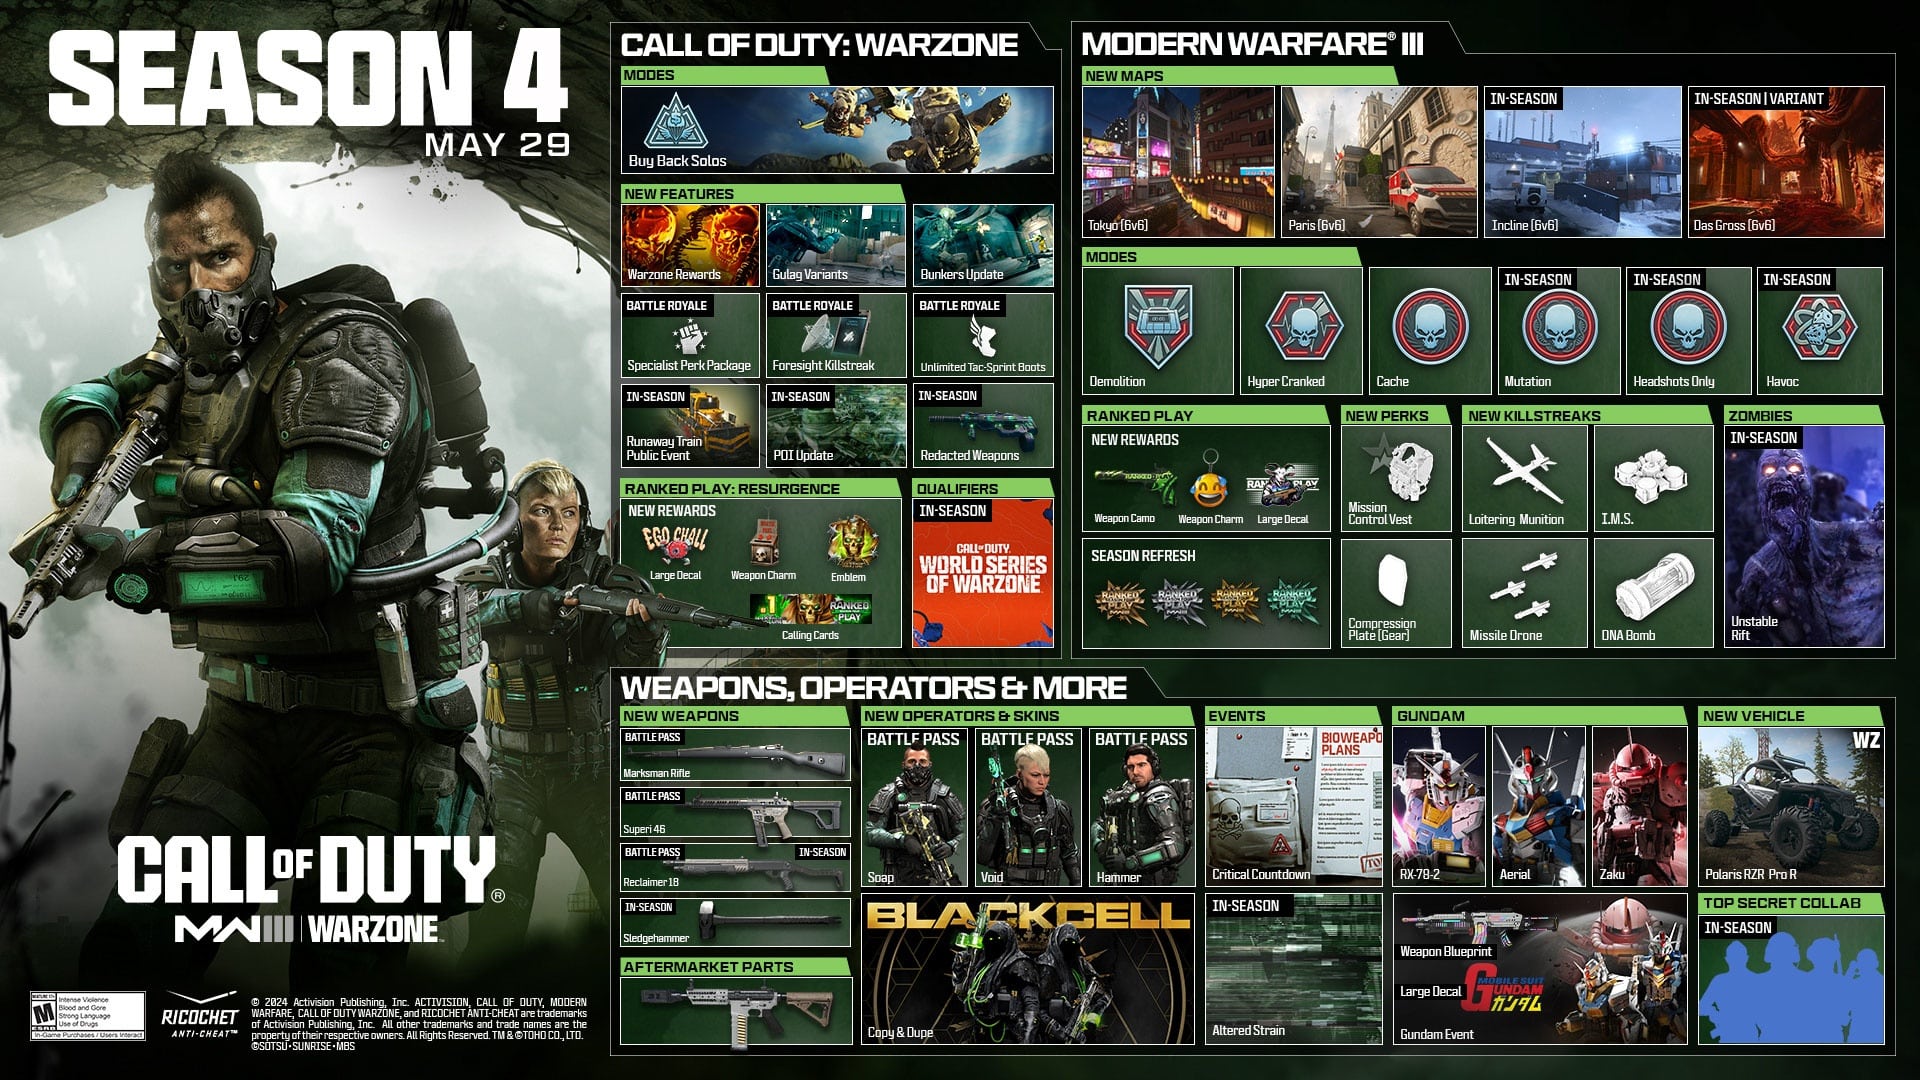 (The complete roadmap for Season 4 in CoD.)